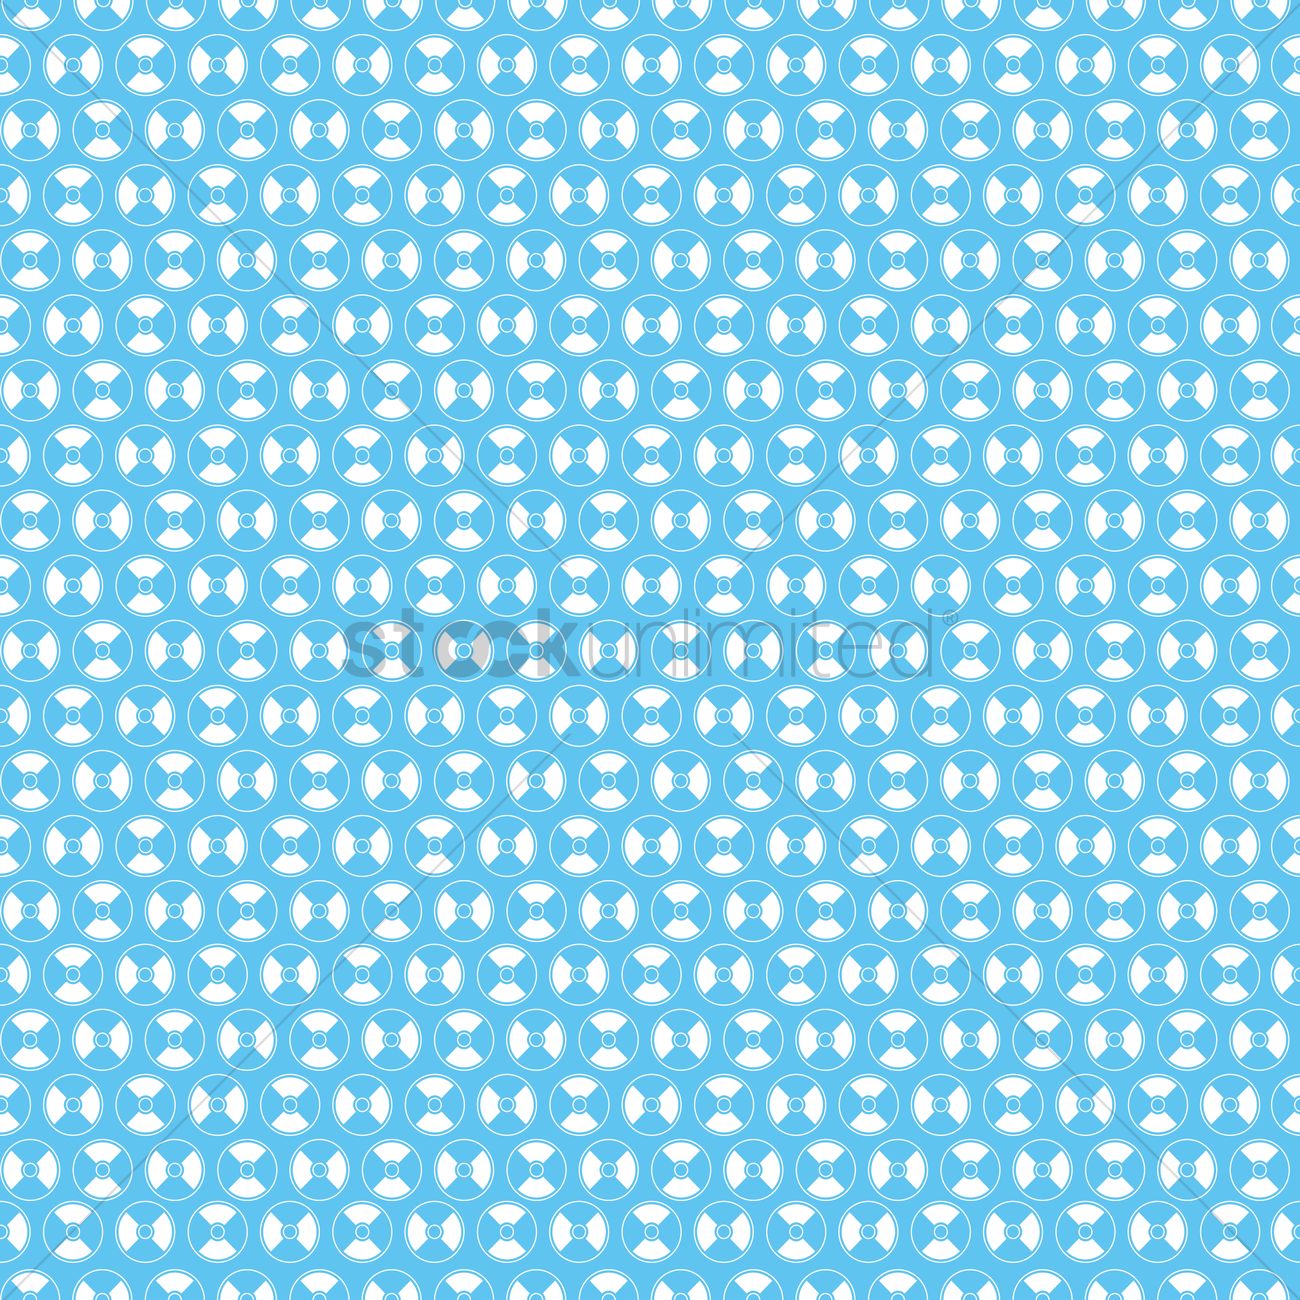 Puter Cooling Fan Pattern Background Vector Image